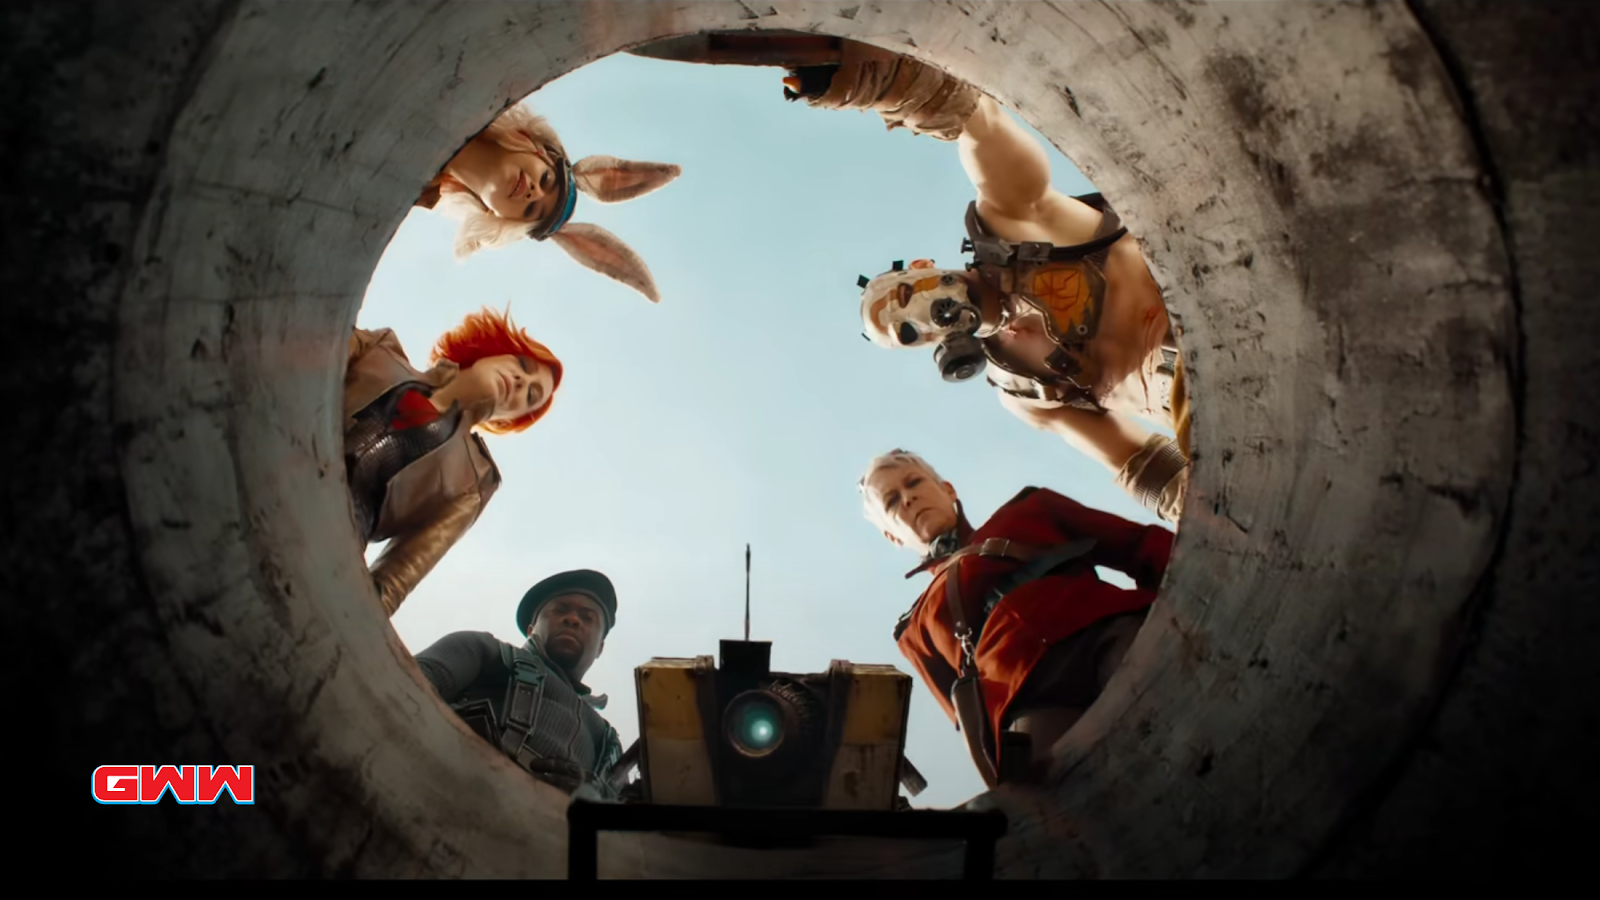 Main characters of Borderlands movie looking down a hole, Borderlands movie release date 